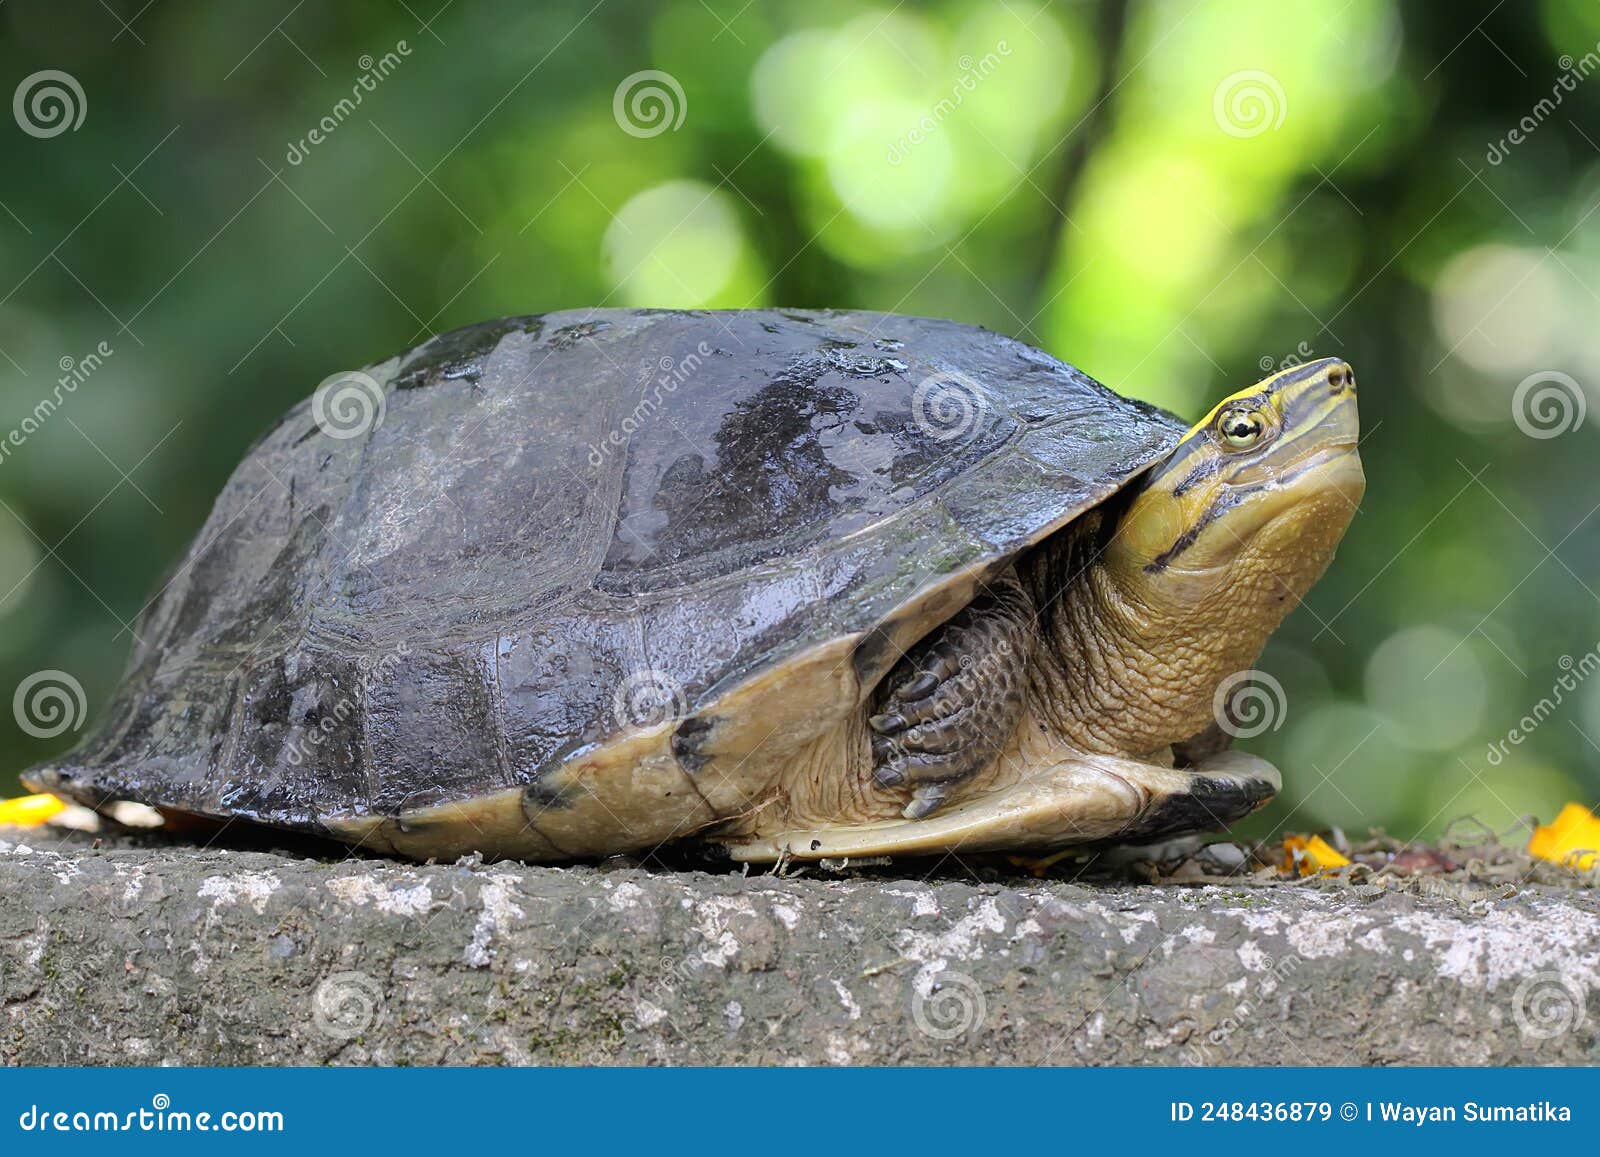 an amboina box turtle or southeast asian box turtle is basking on a rock by the river.